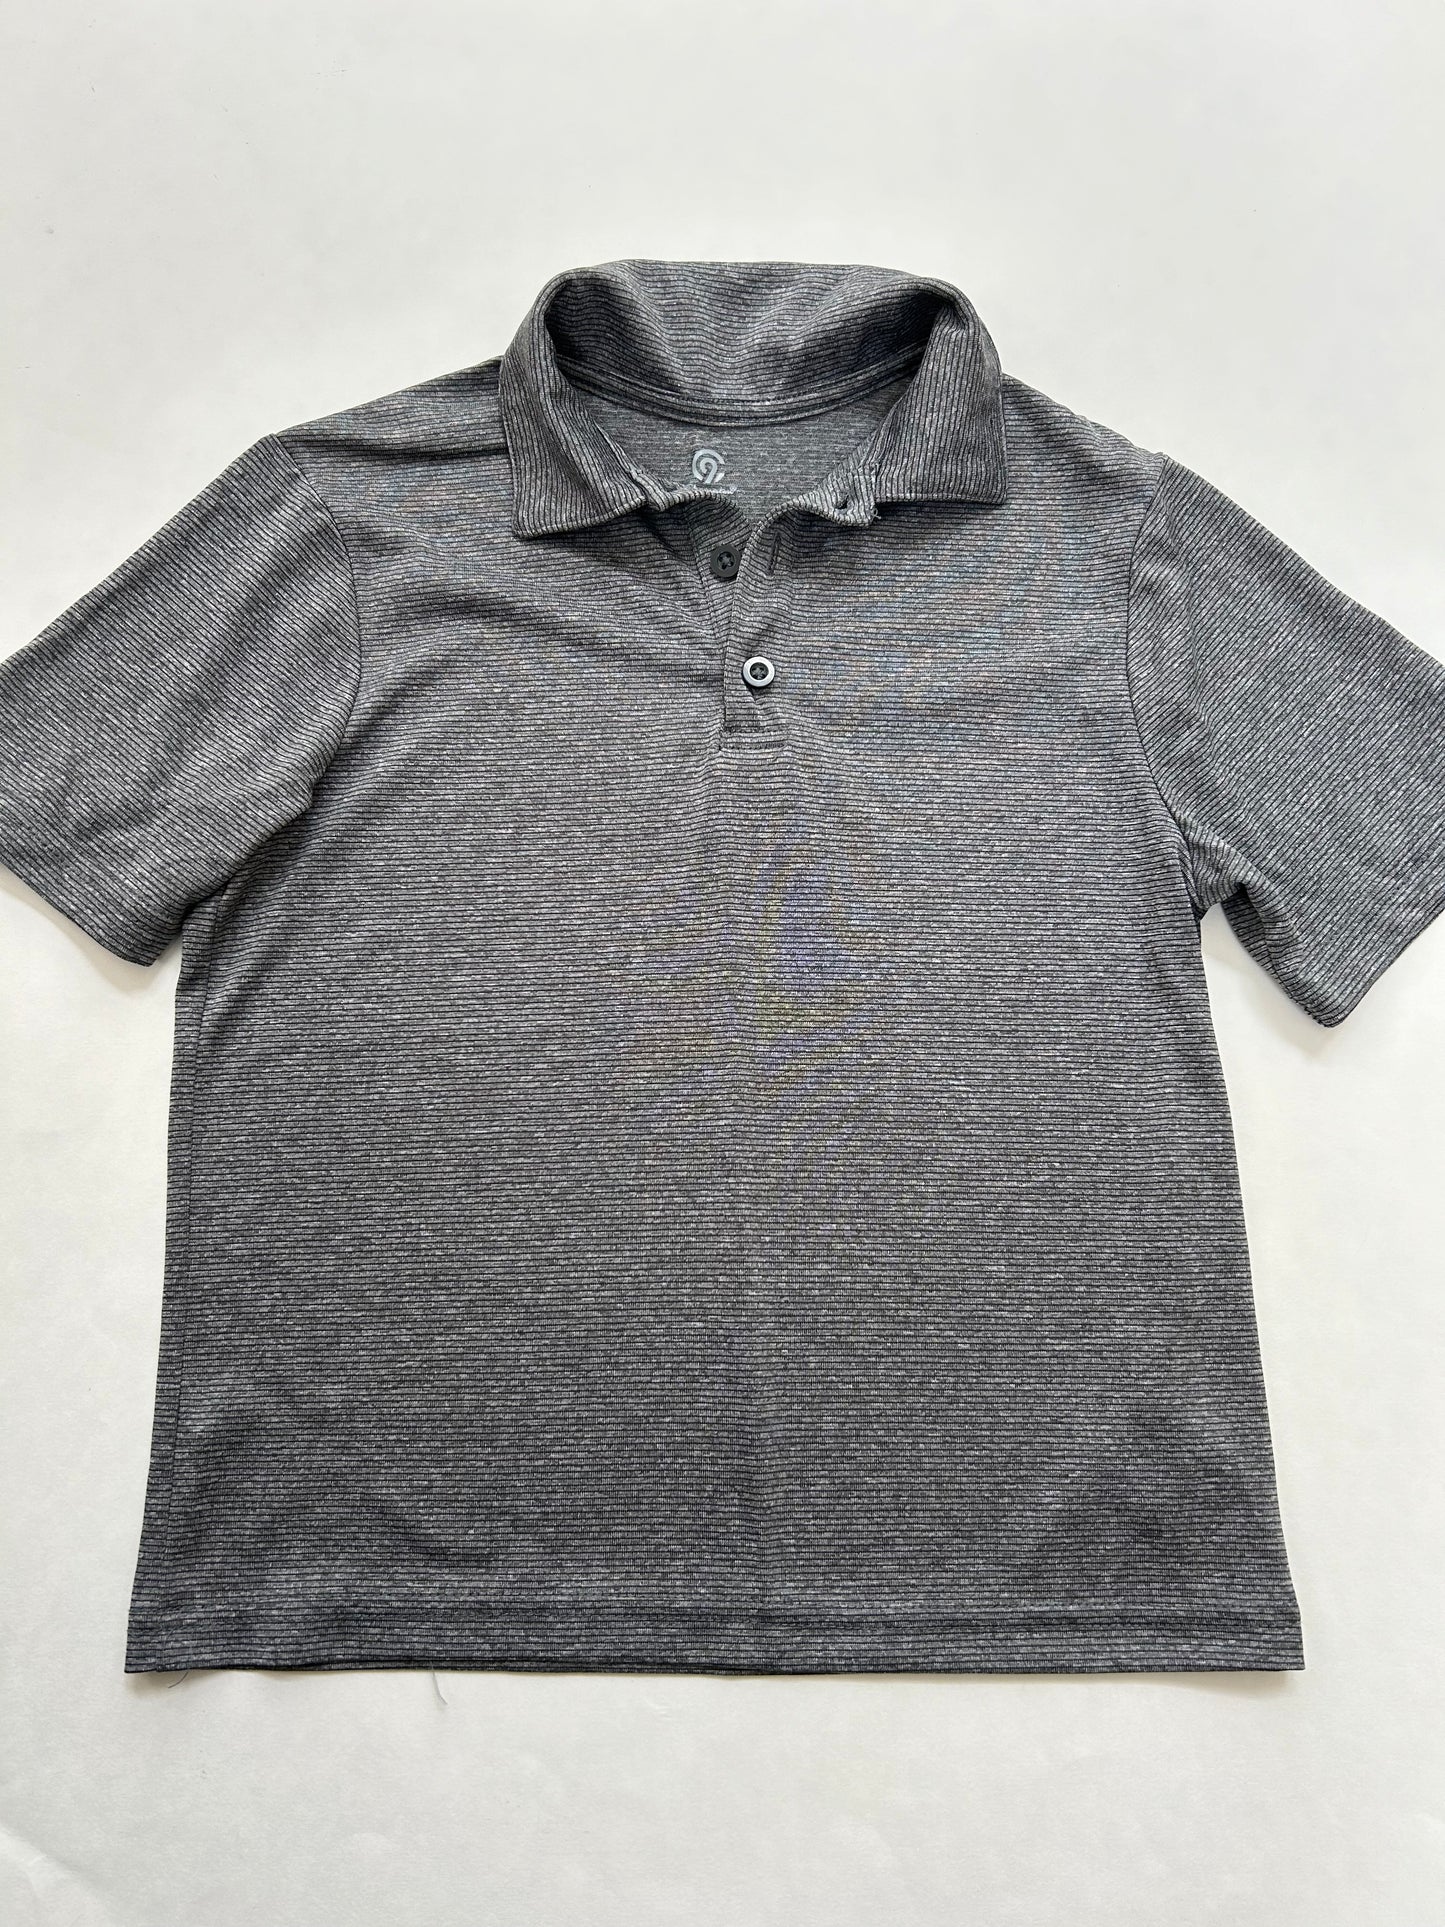 Boys size 6-7 small Champion dry fit gray polo